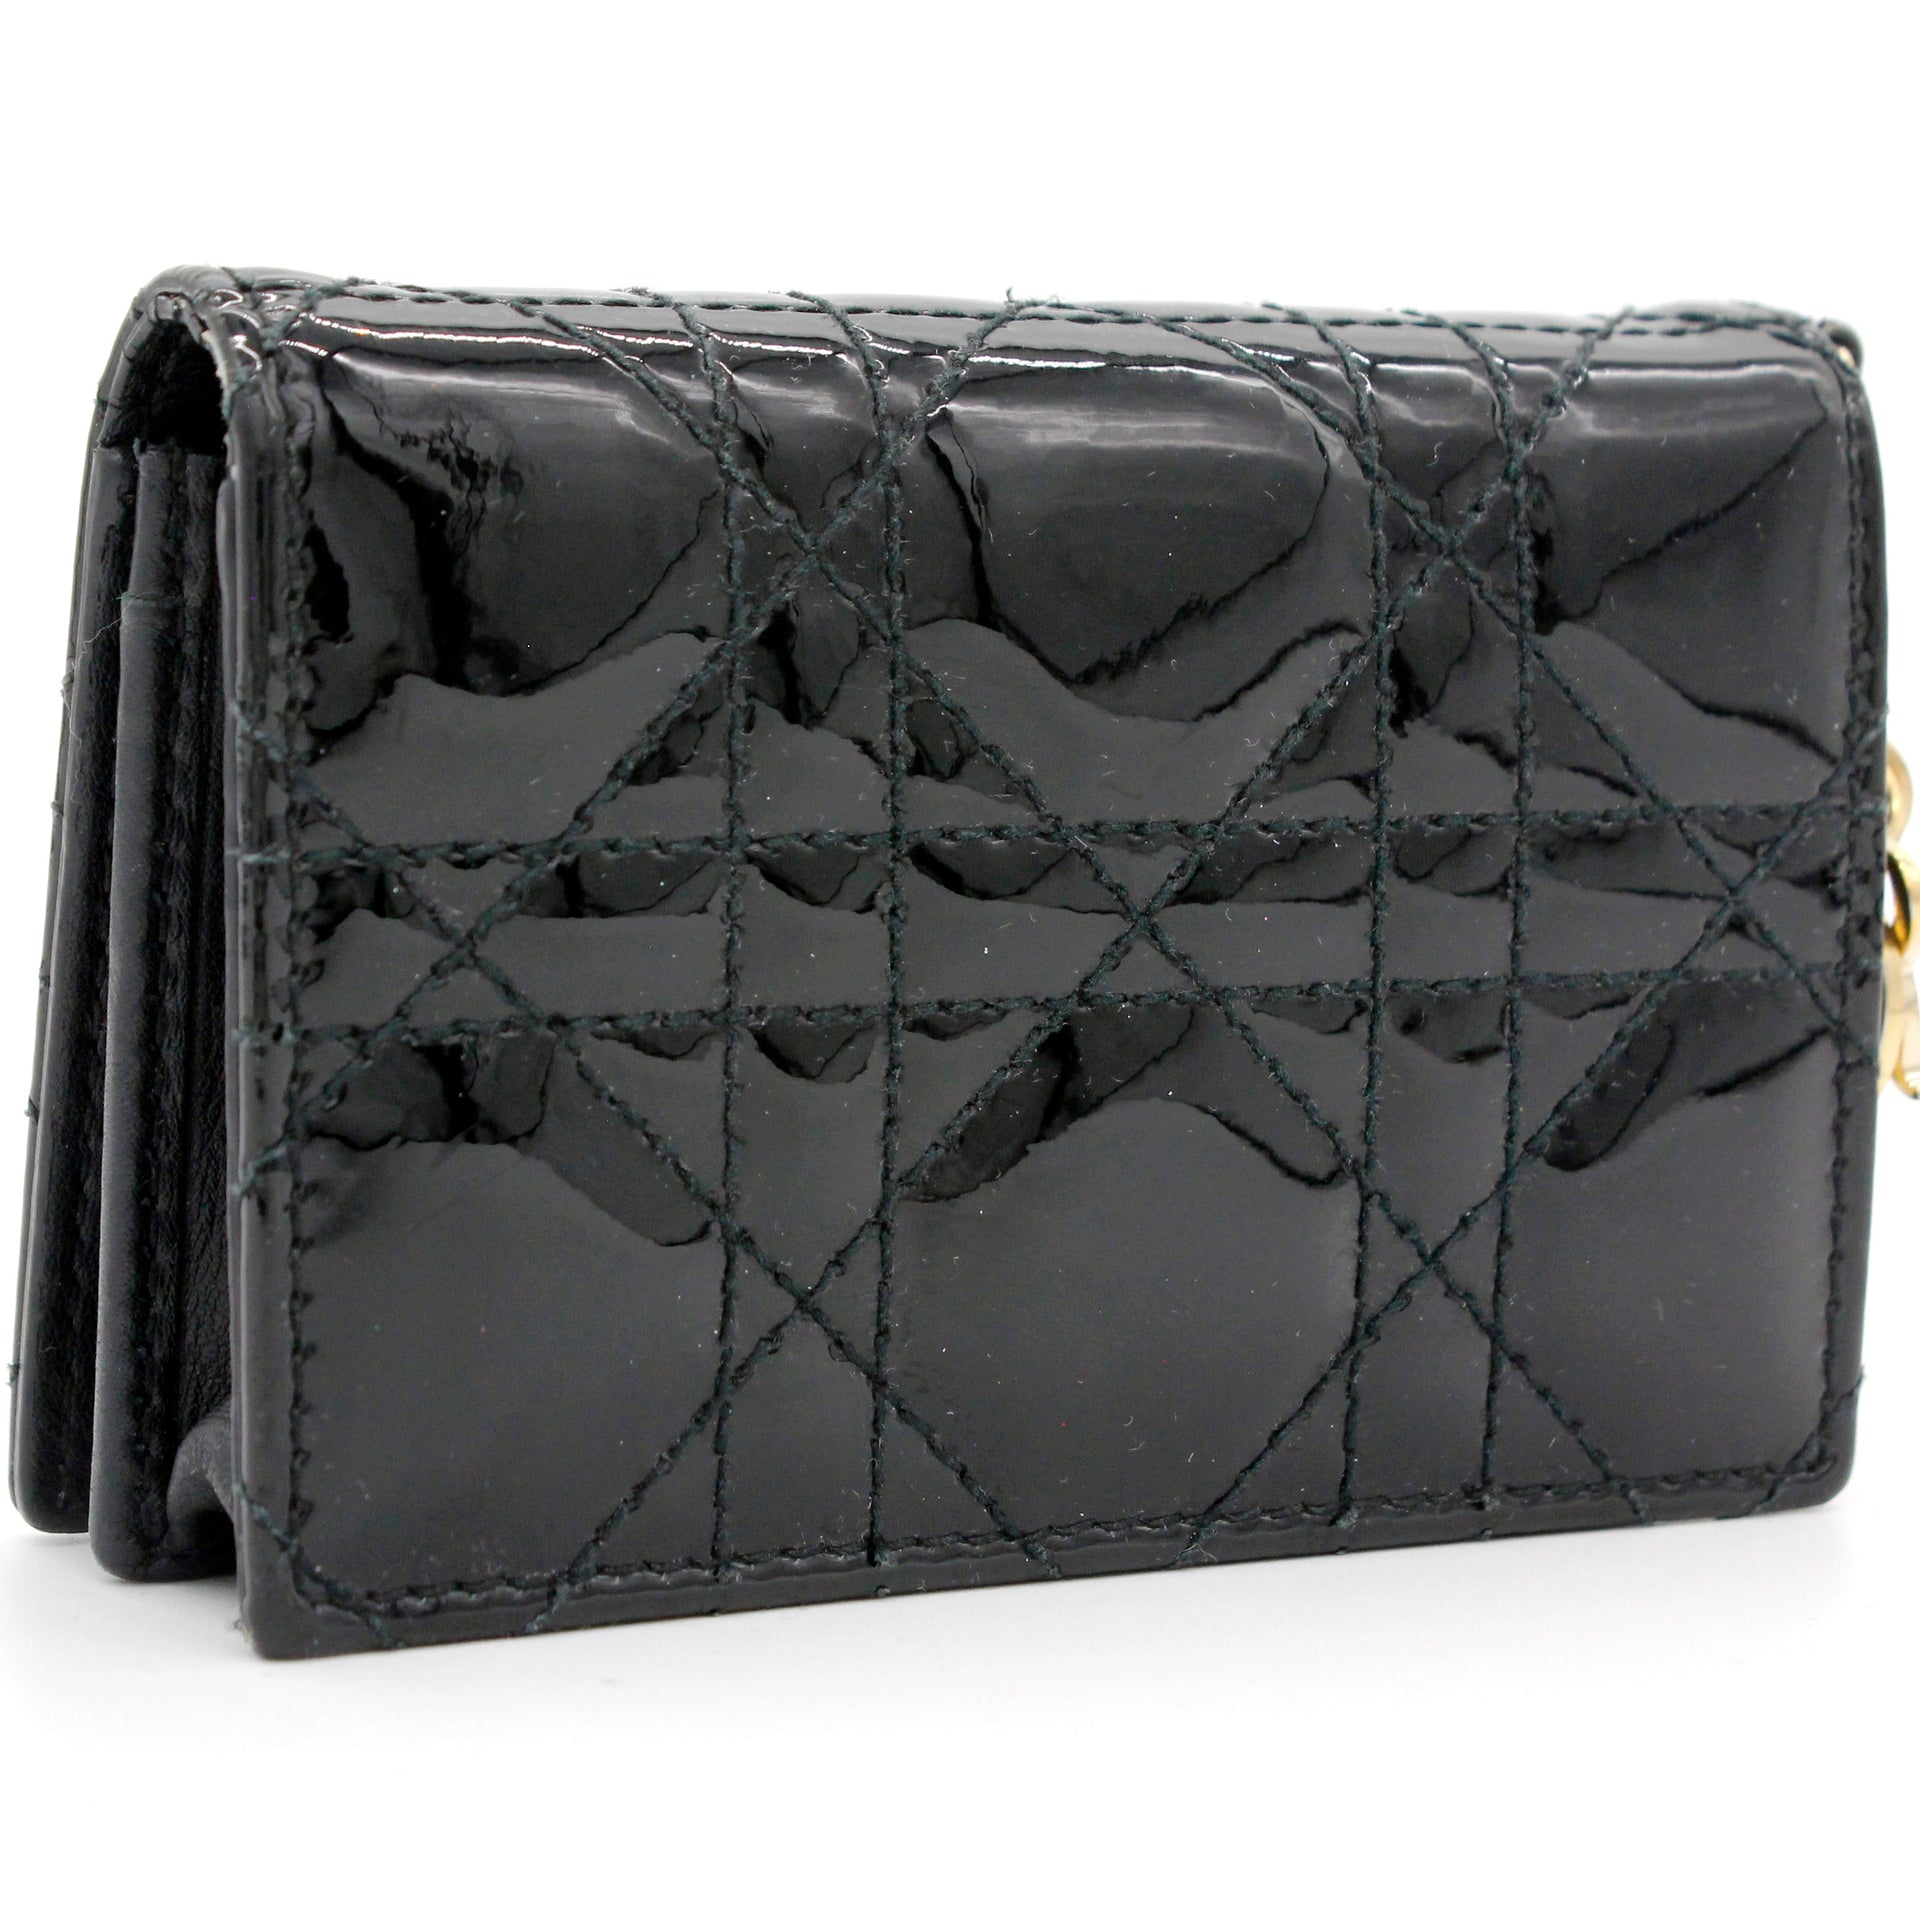 Christian Dior Studded Diorama Patent Leather Wallet  DESIGNER TAKEAWAY BY  QUEEN OF LUXURY BOUTIQUE INC